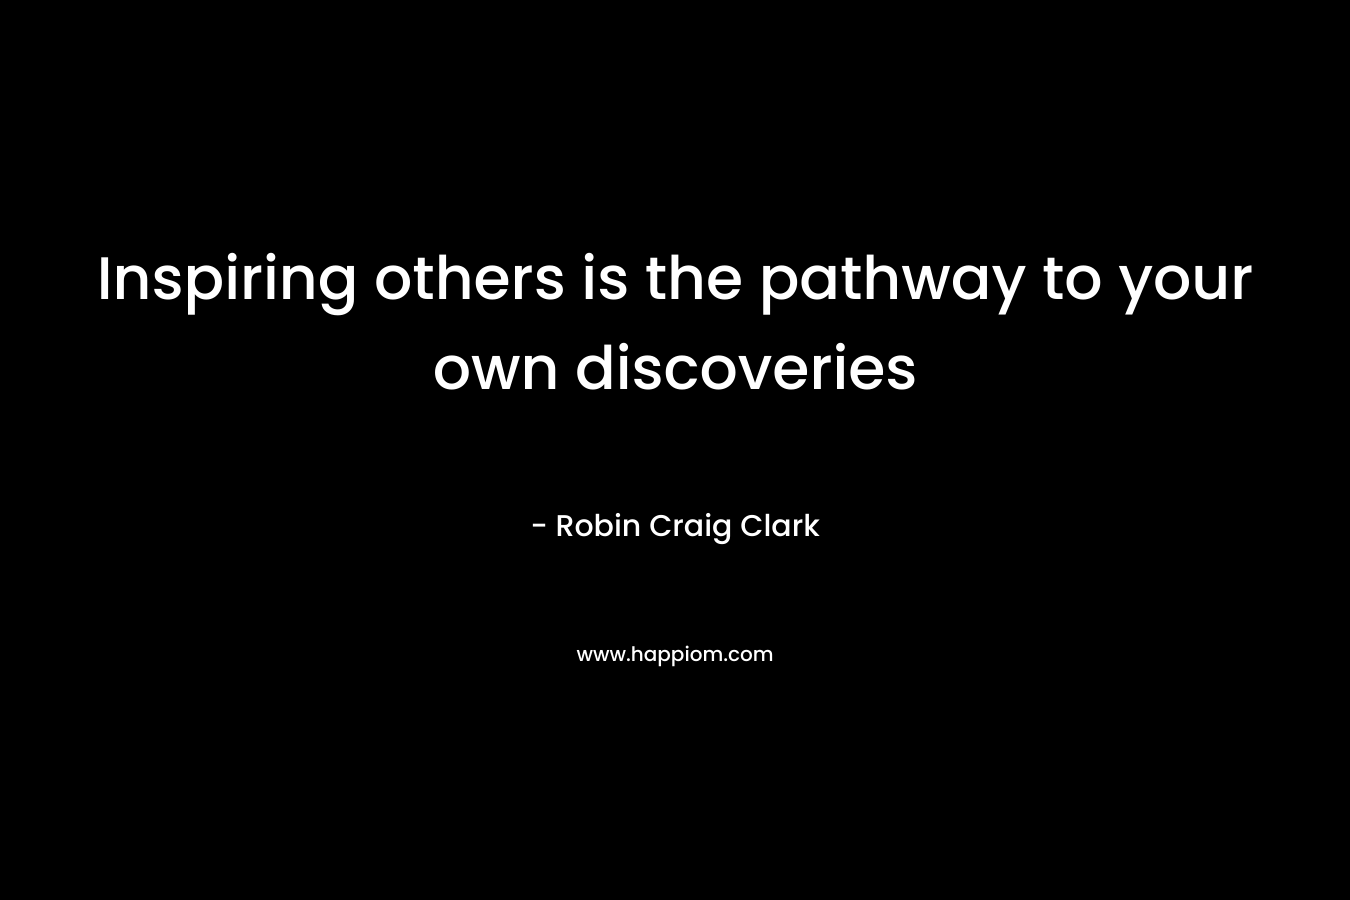 Inspiring others is the pathway to your own discoveries